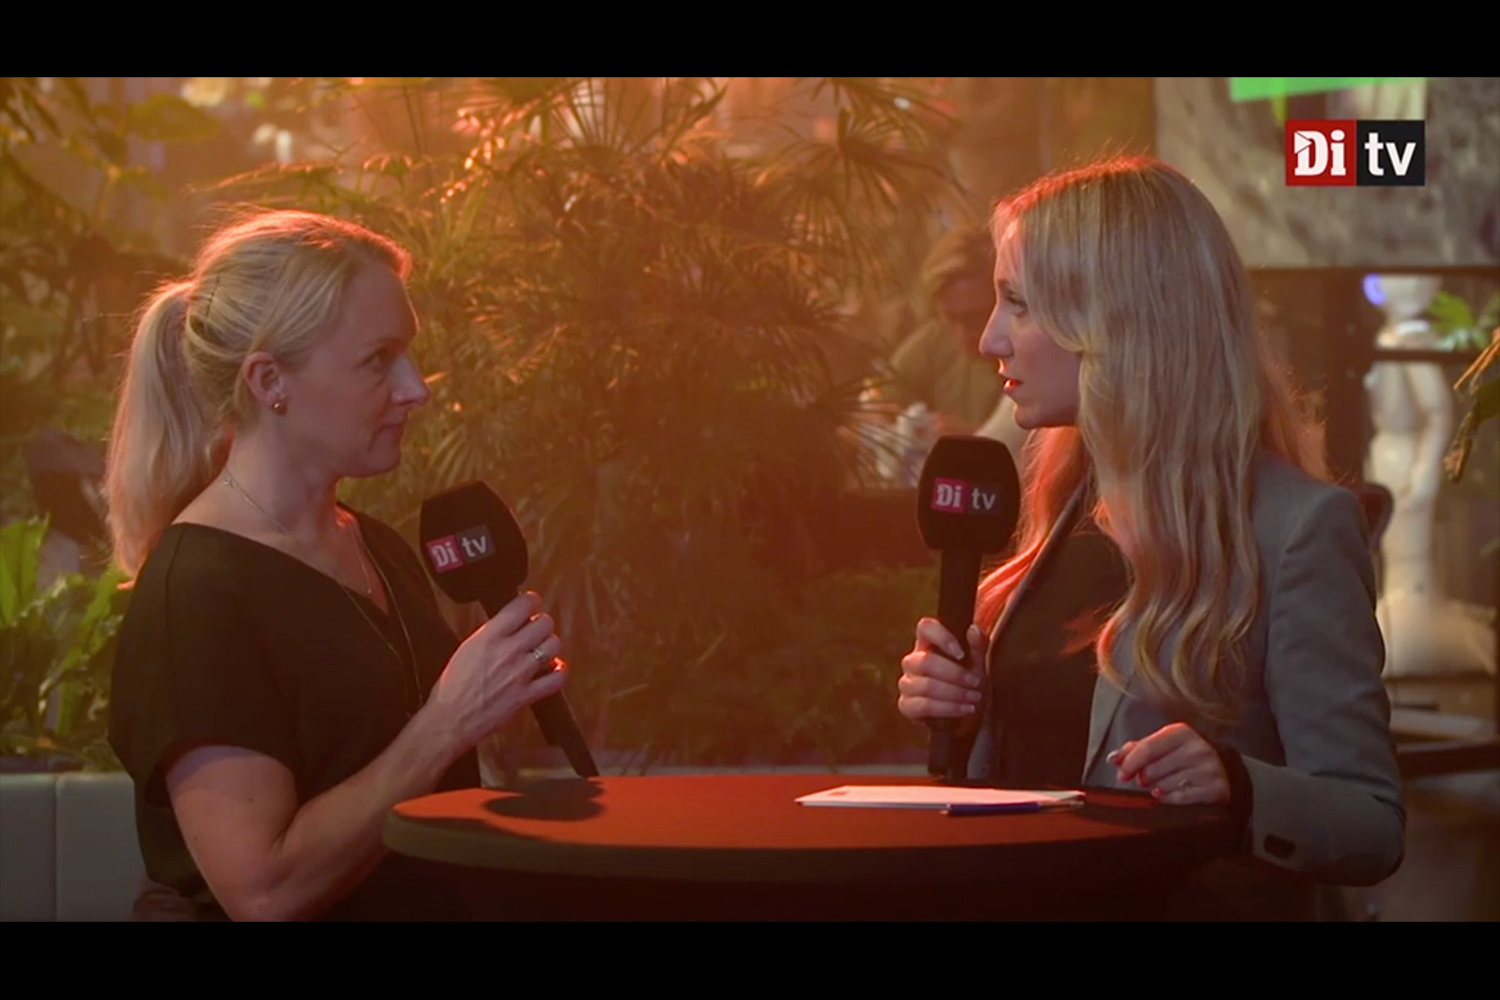 Our CEO, Kristina Lagerstedt, being interviewed by Dagens Industri TV at Norrsken Impact Week.